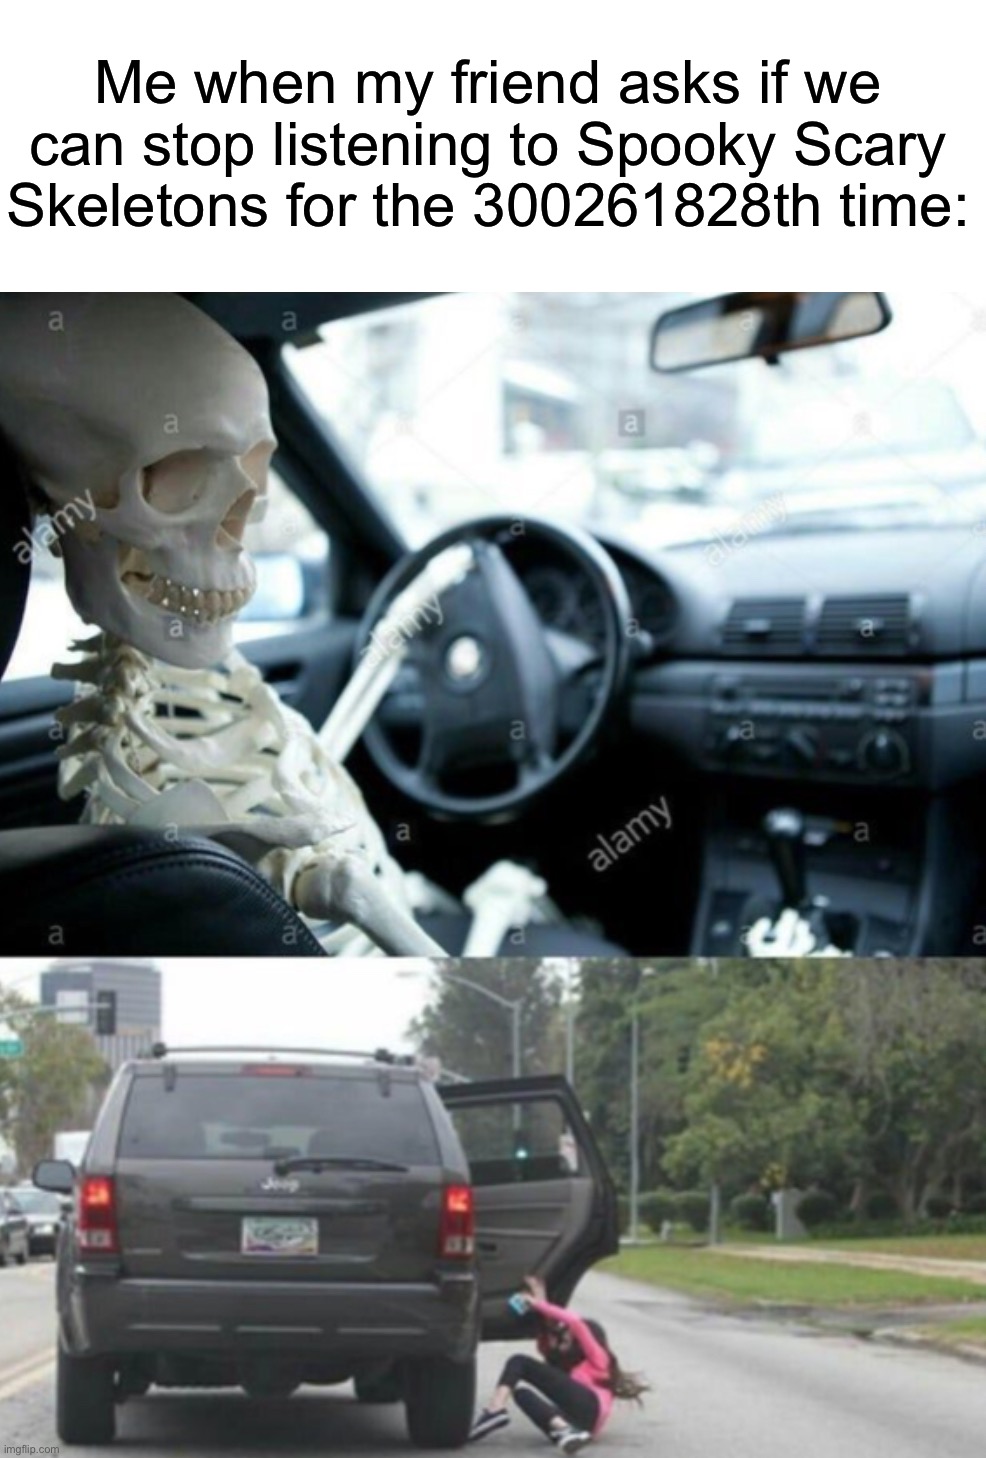 “You uncultured swine!” | Me when my friend asks if we can stop listening to Spooky Scary Skeletons for the 300261828th time: | image tagged in memes,funny,halloween,spooky scary skeleton,spooky month,skeleton | made w/ Imgflip meme maker